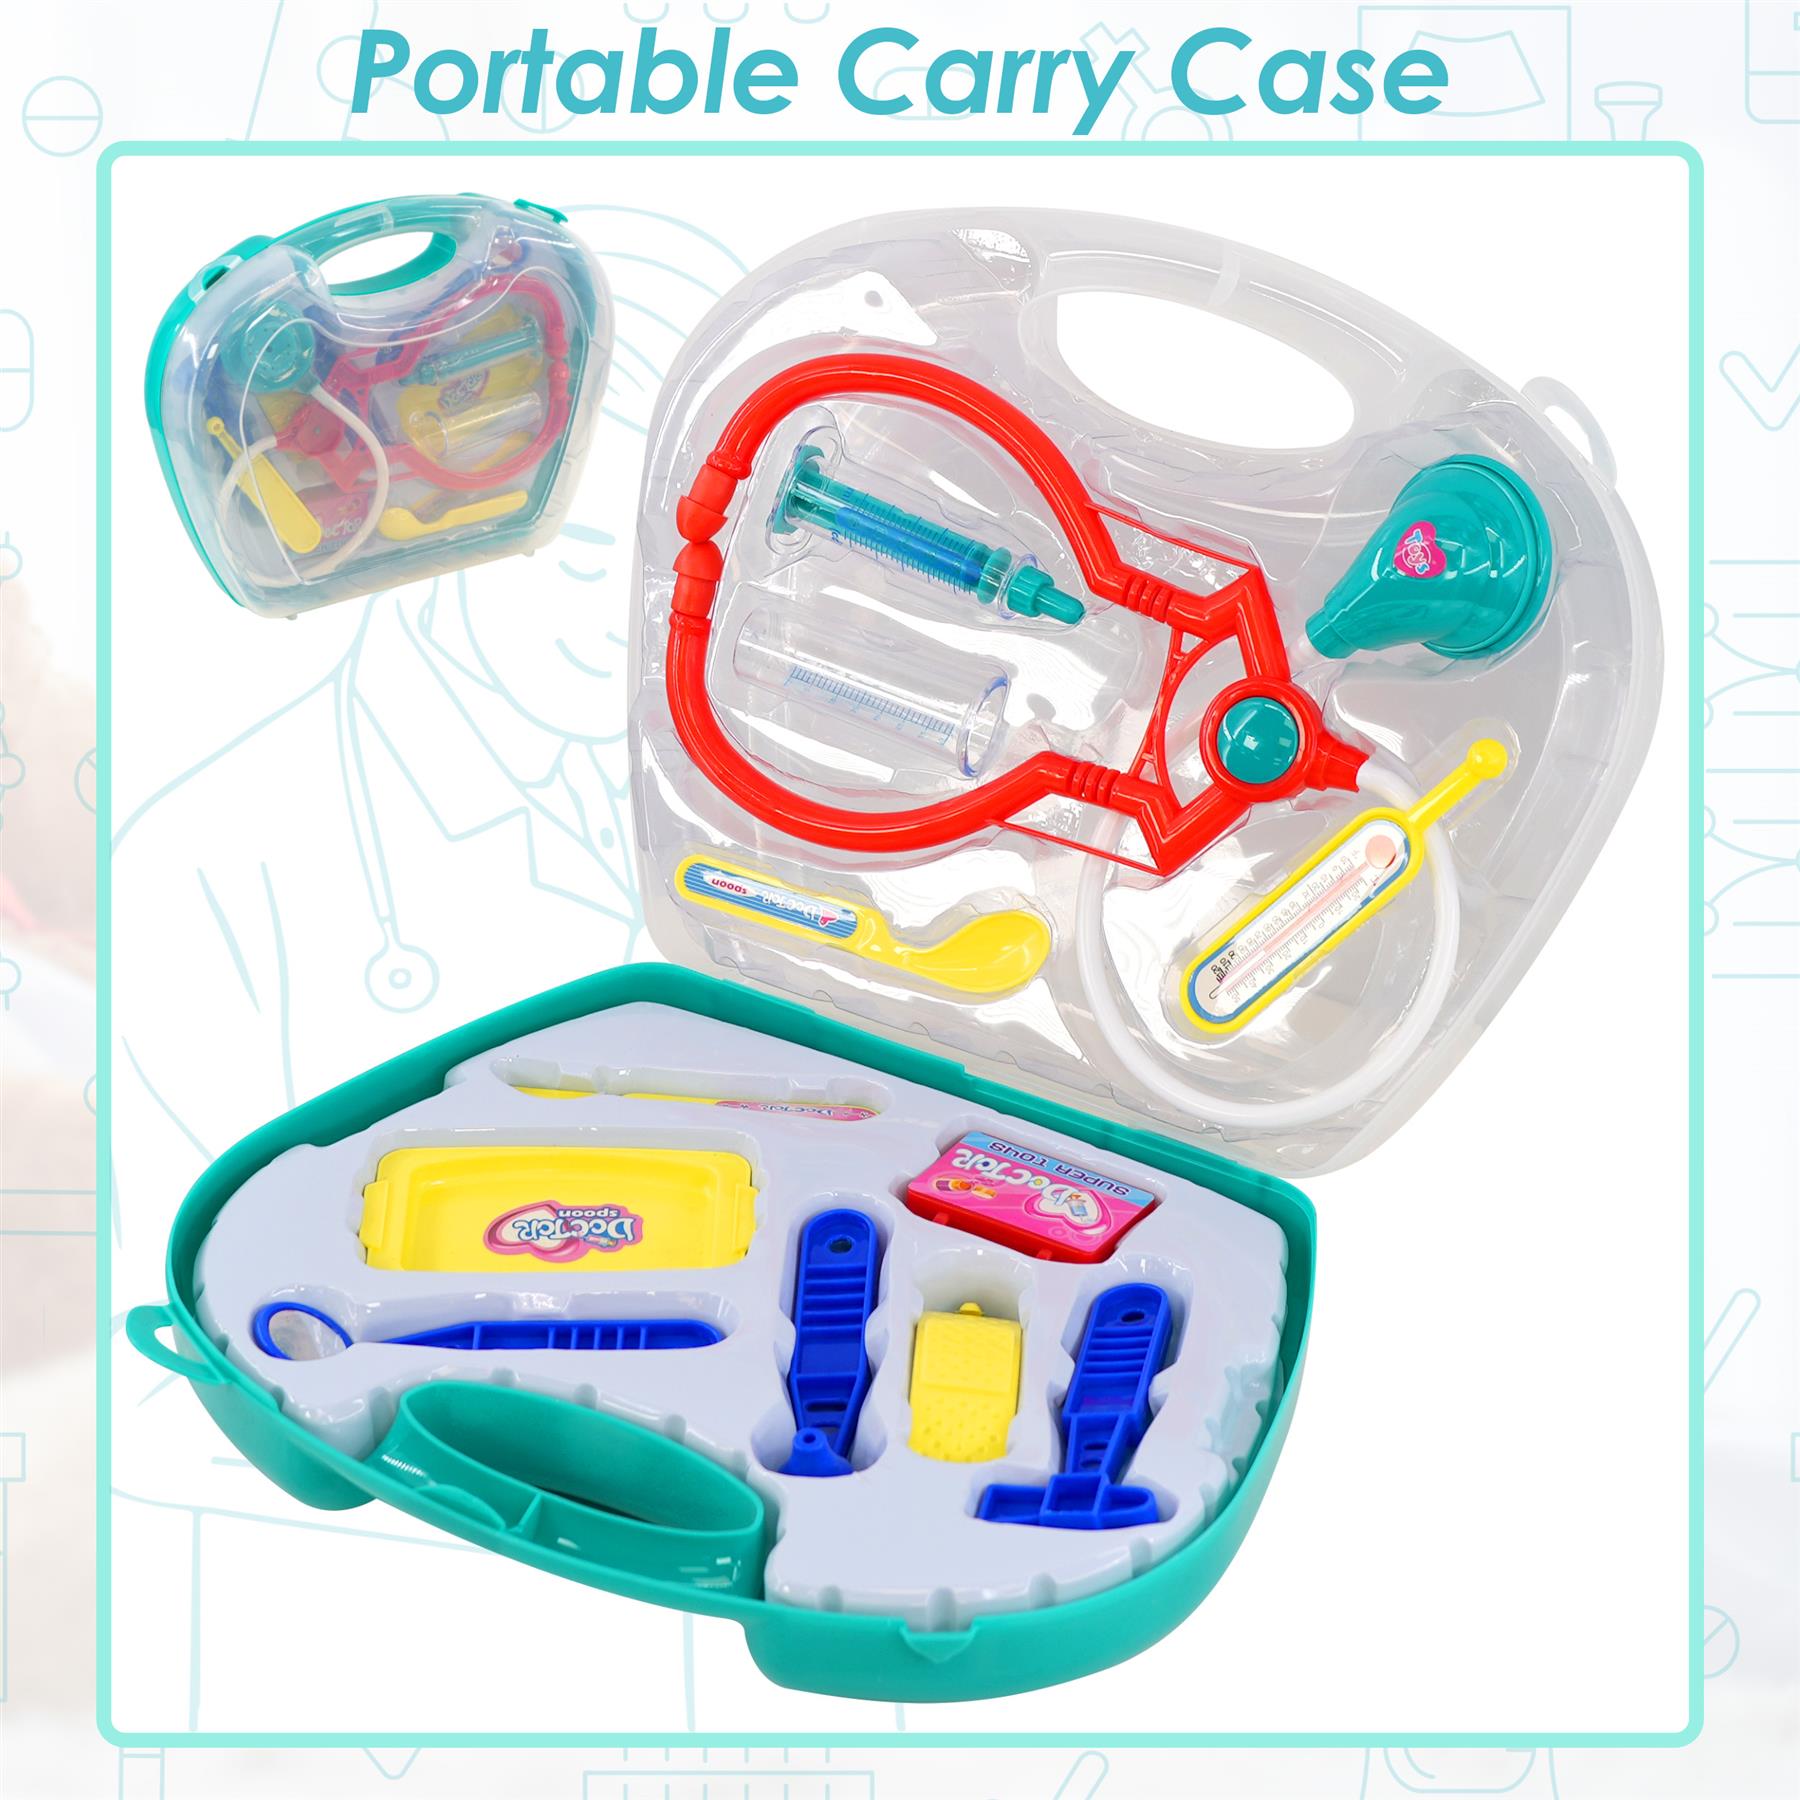 Kids Doctors Set with Carry Case by The Magic Toy Shop - UKBuyZone